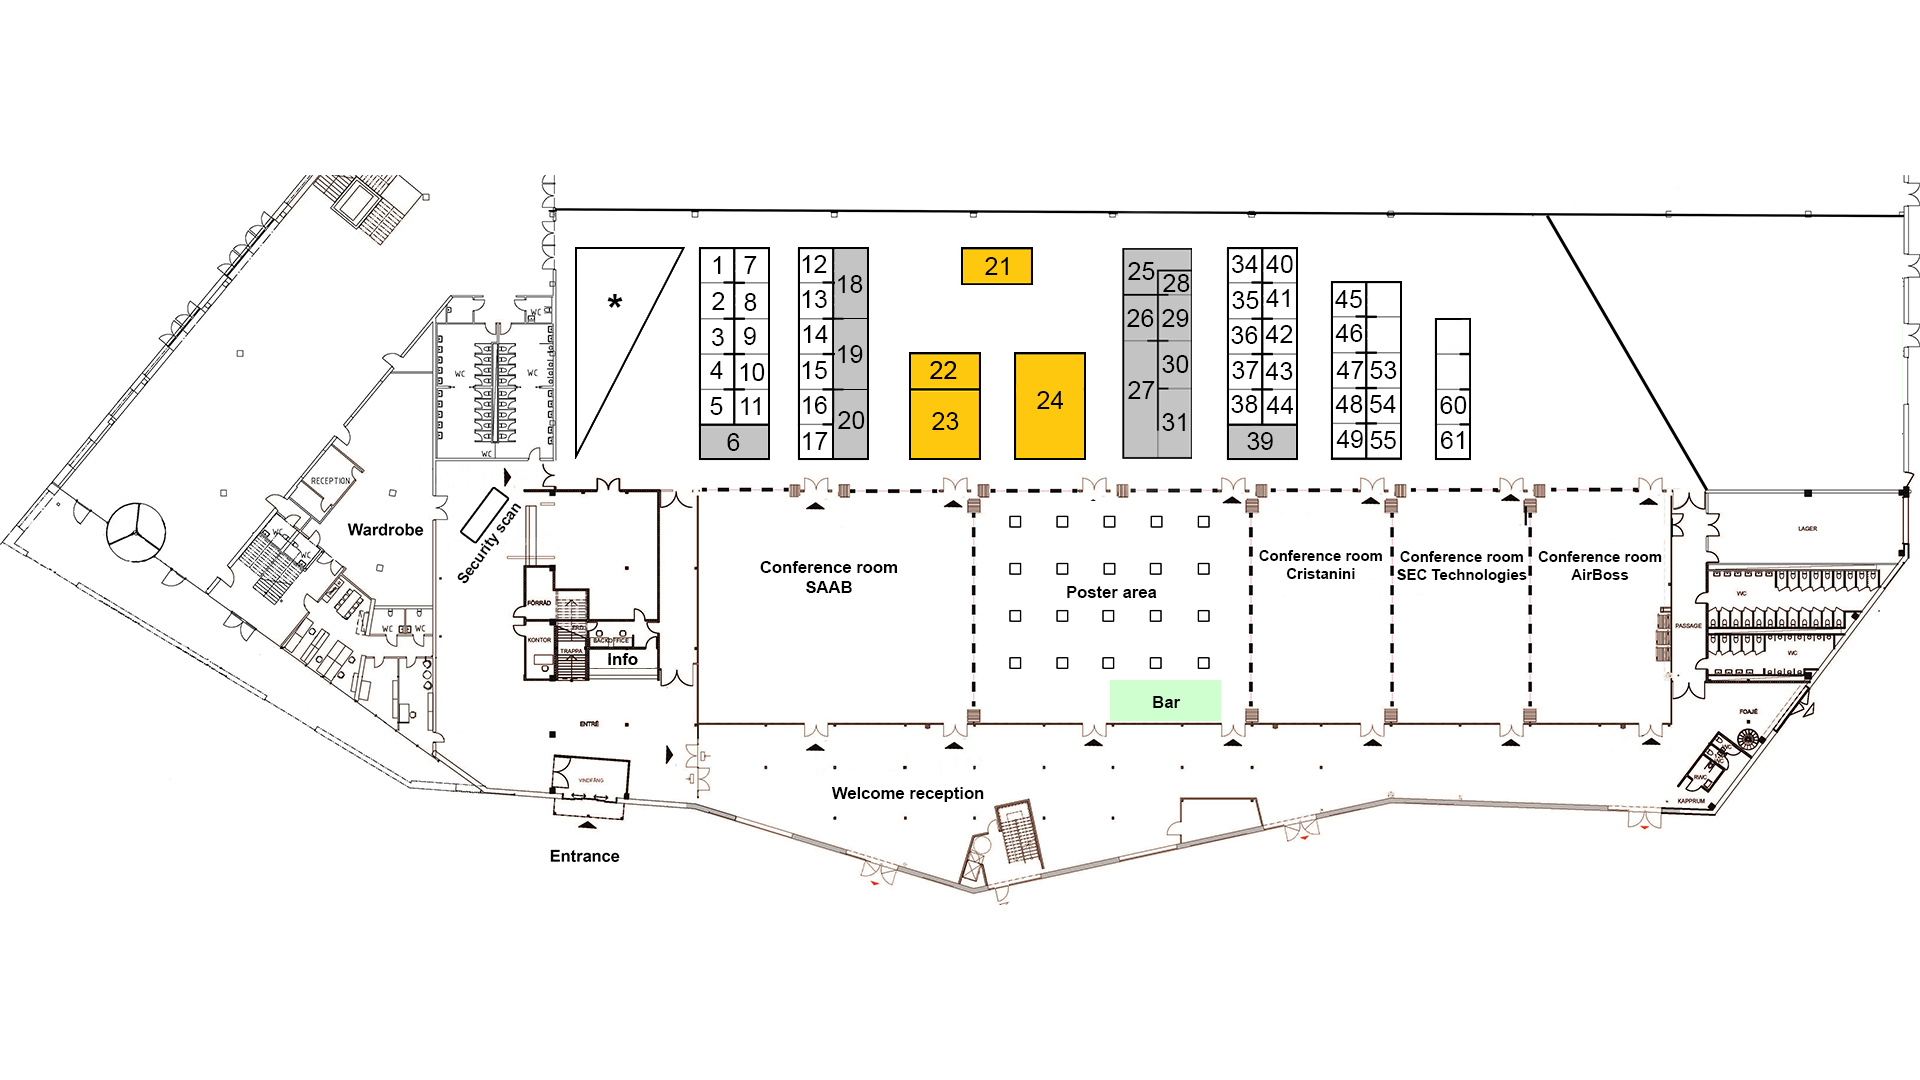 This is the floorplan for the exhibition of CBRNE 2022